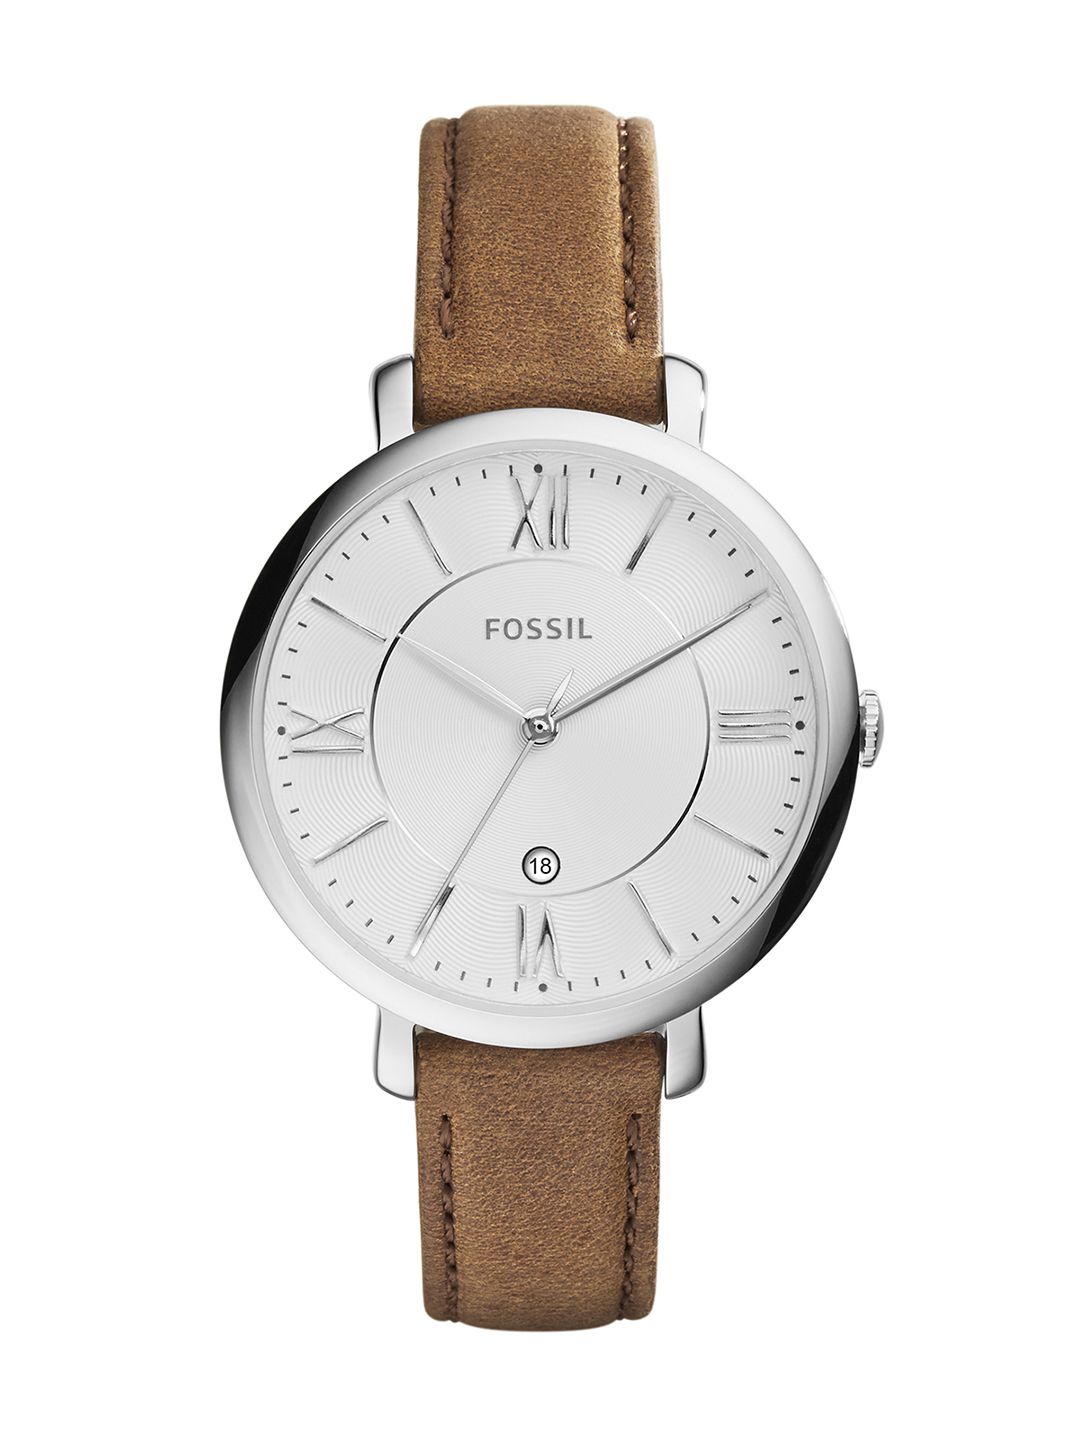 Fossil Women Silver-Toned Analogue Watch Price in India